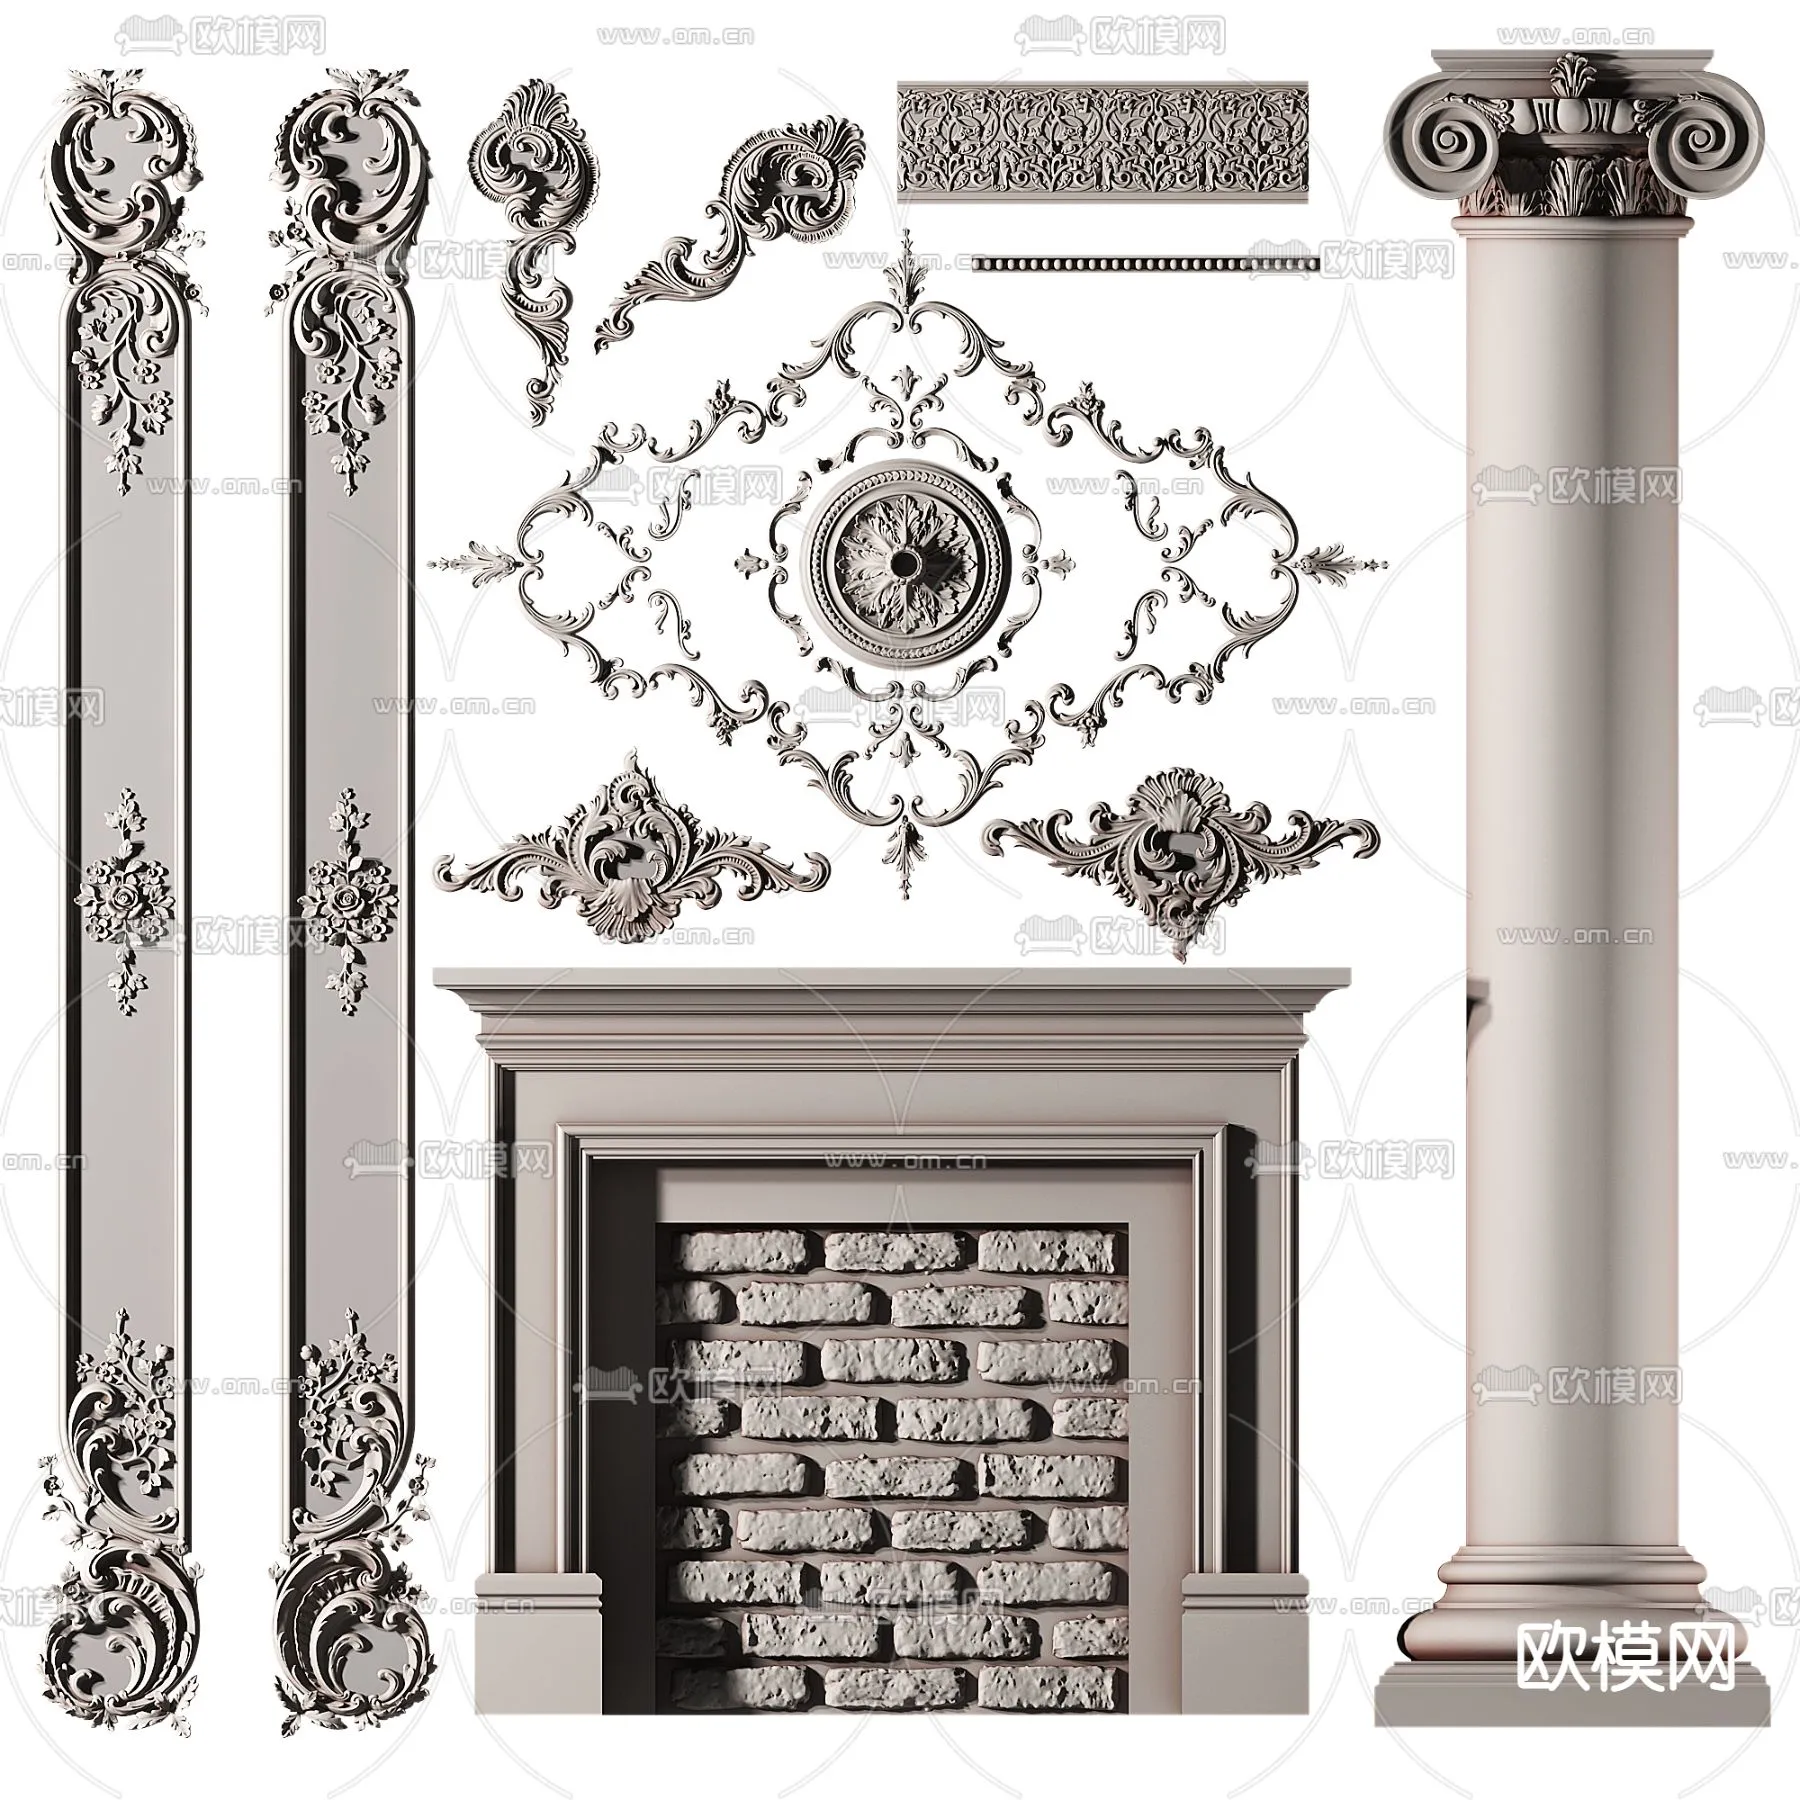 CLASSIC – FIREPLACE 3DMODELS – 072